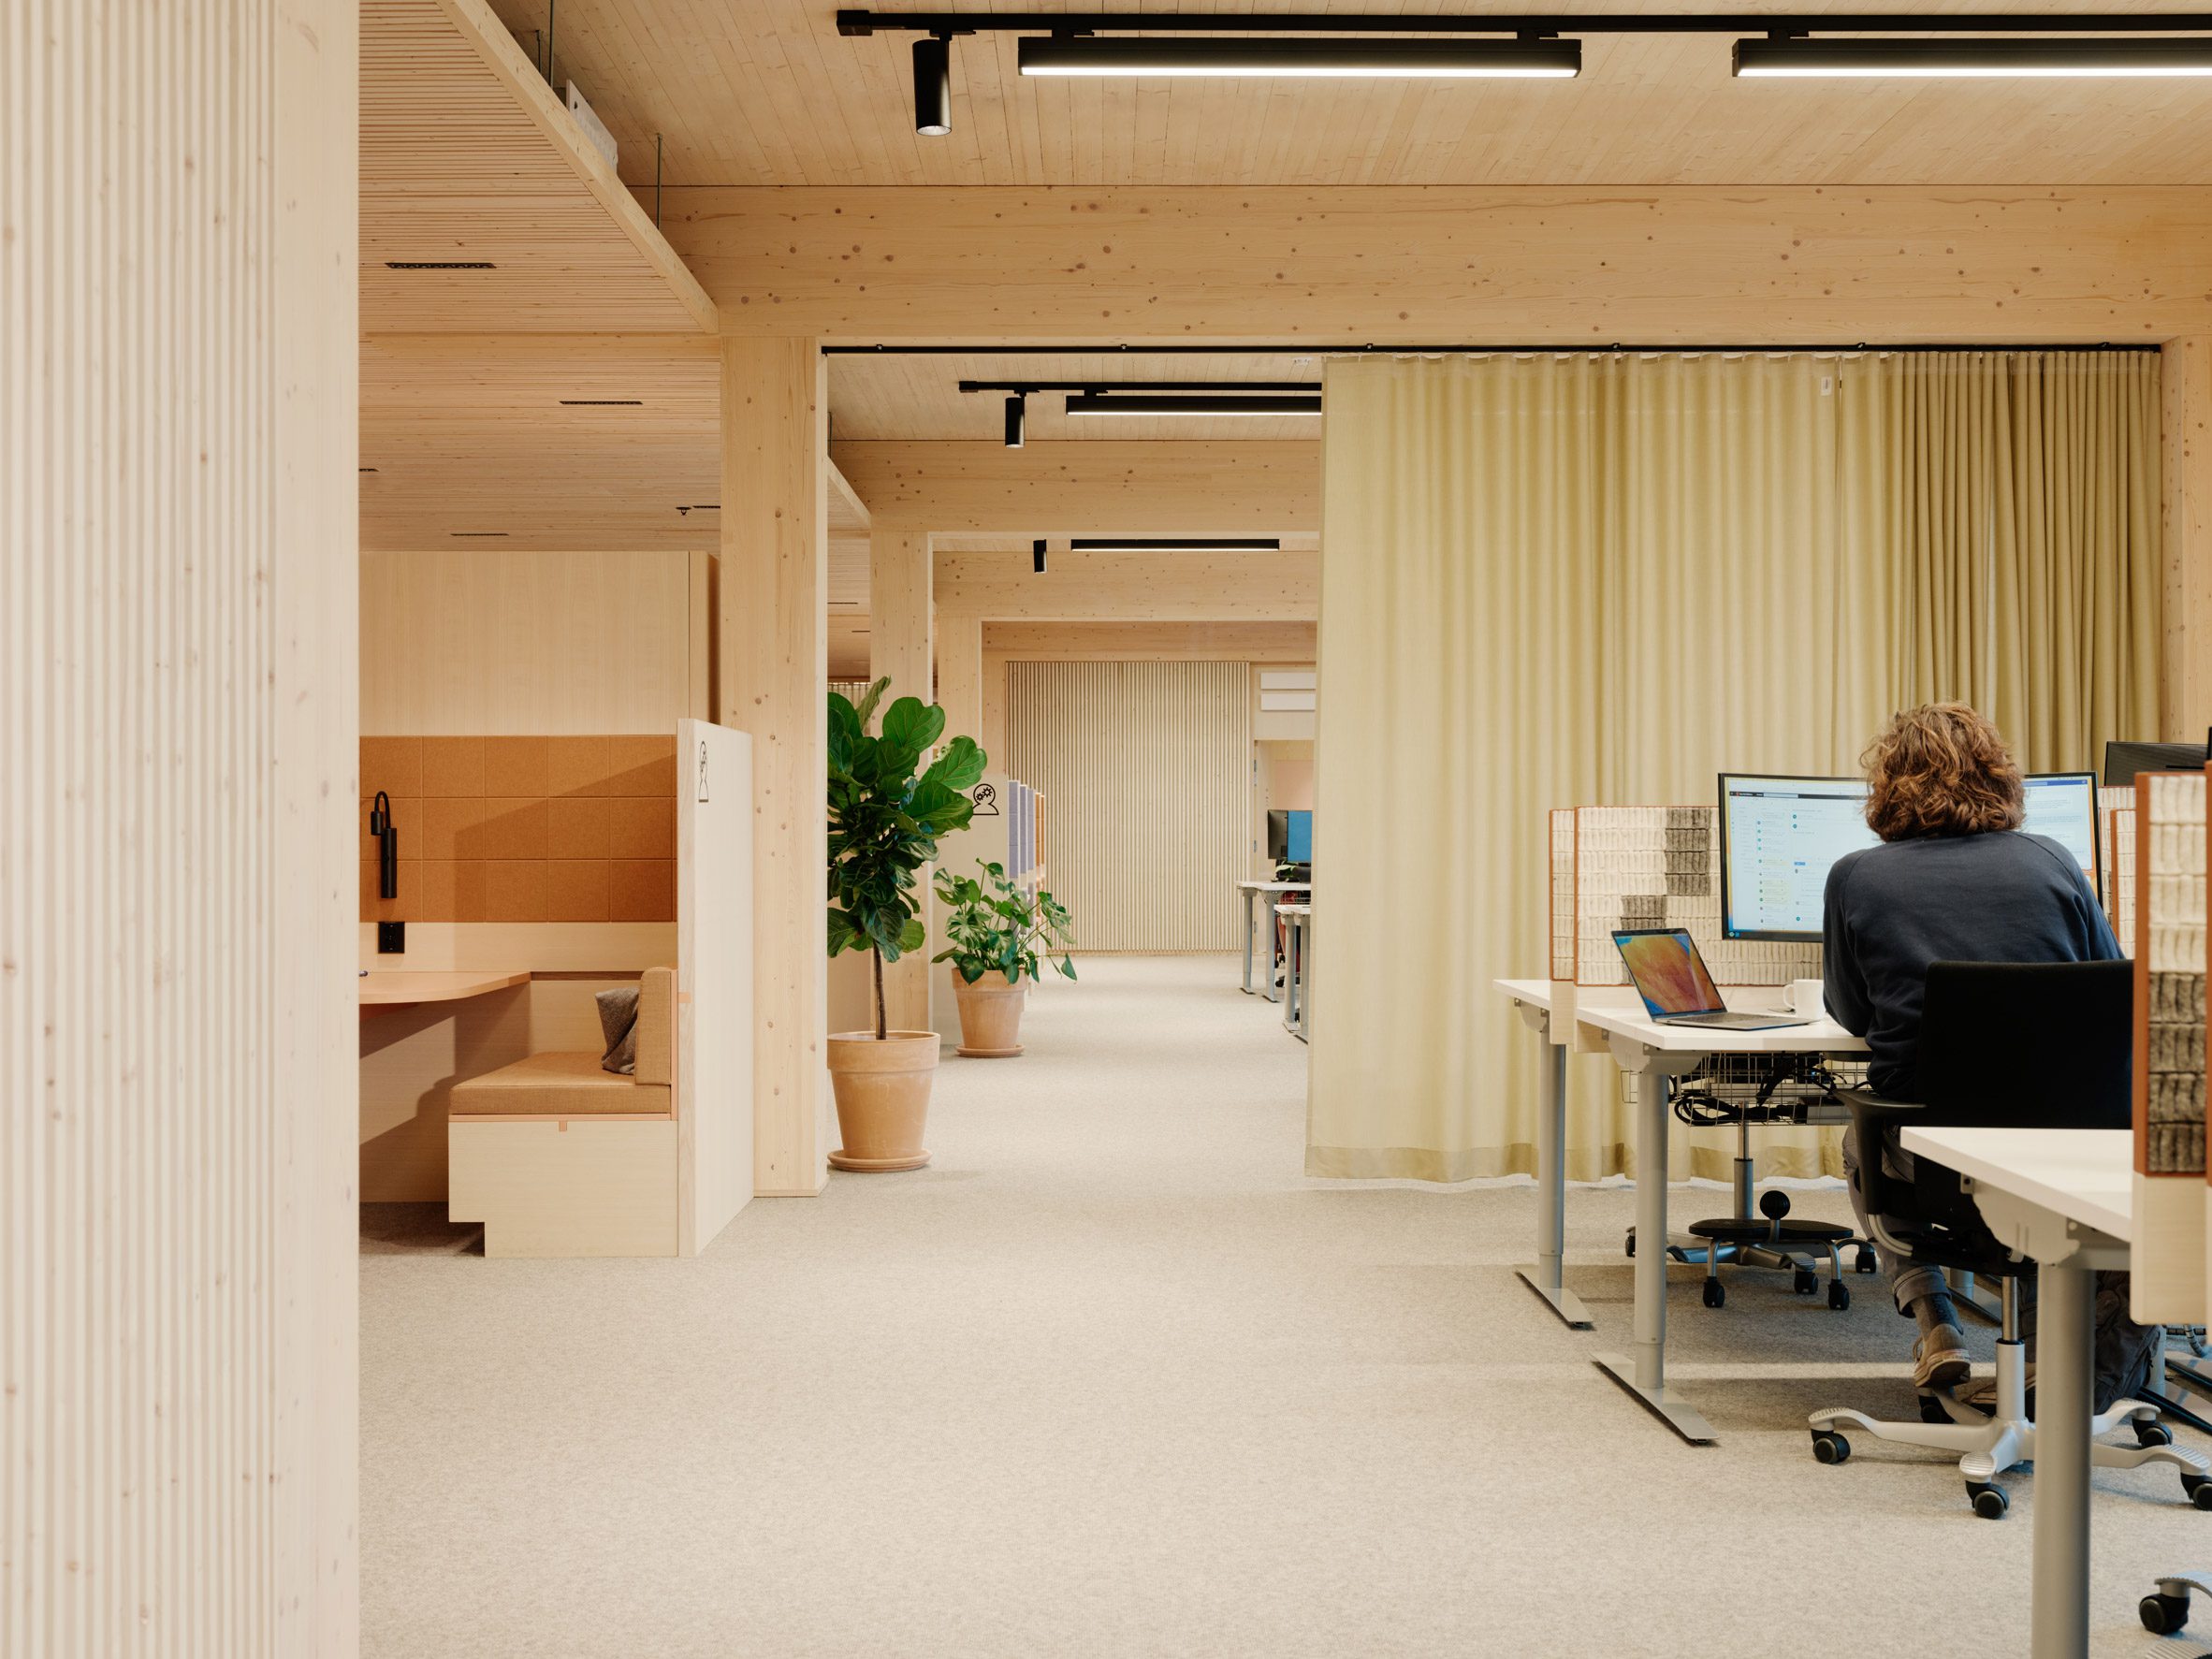 Interior workplace of timber office by Oslotre designs in Norway